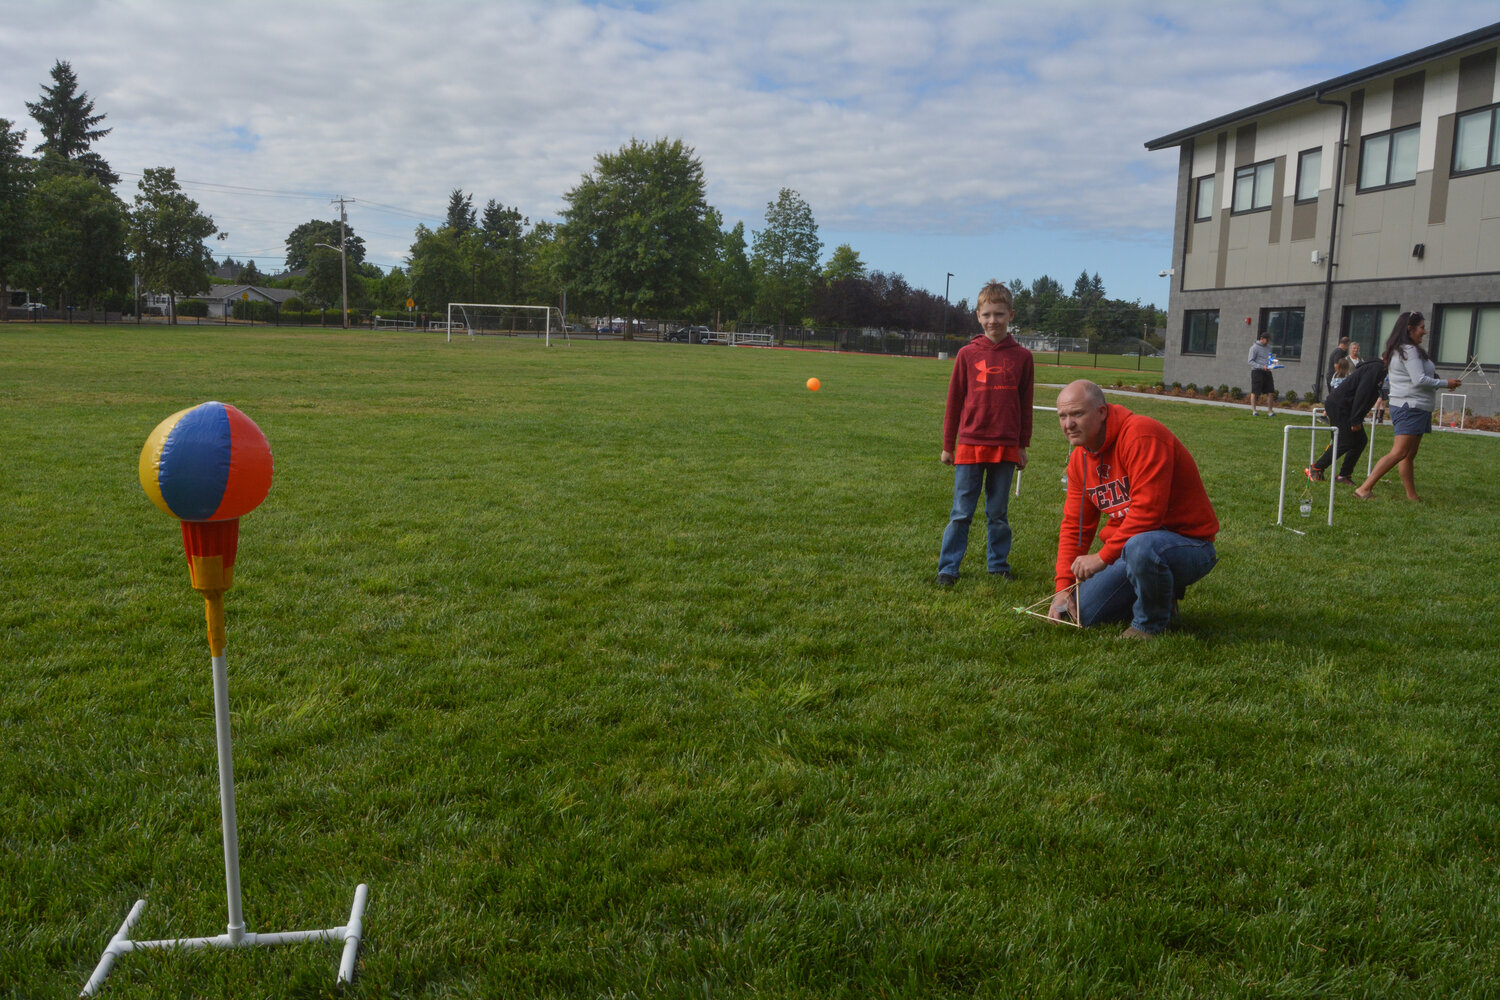 A parent takes a shot at the meteor strike activity at STEMKAMP Family Day on Aug. 11.